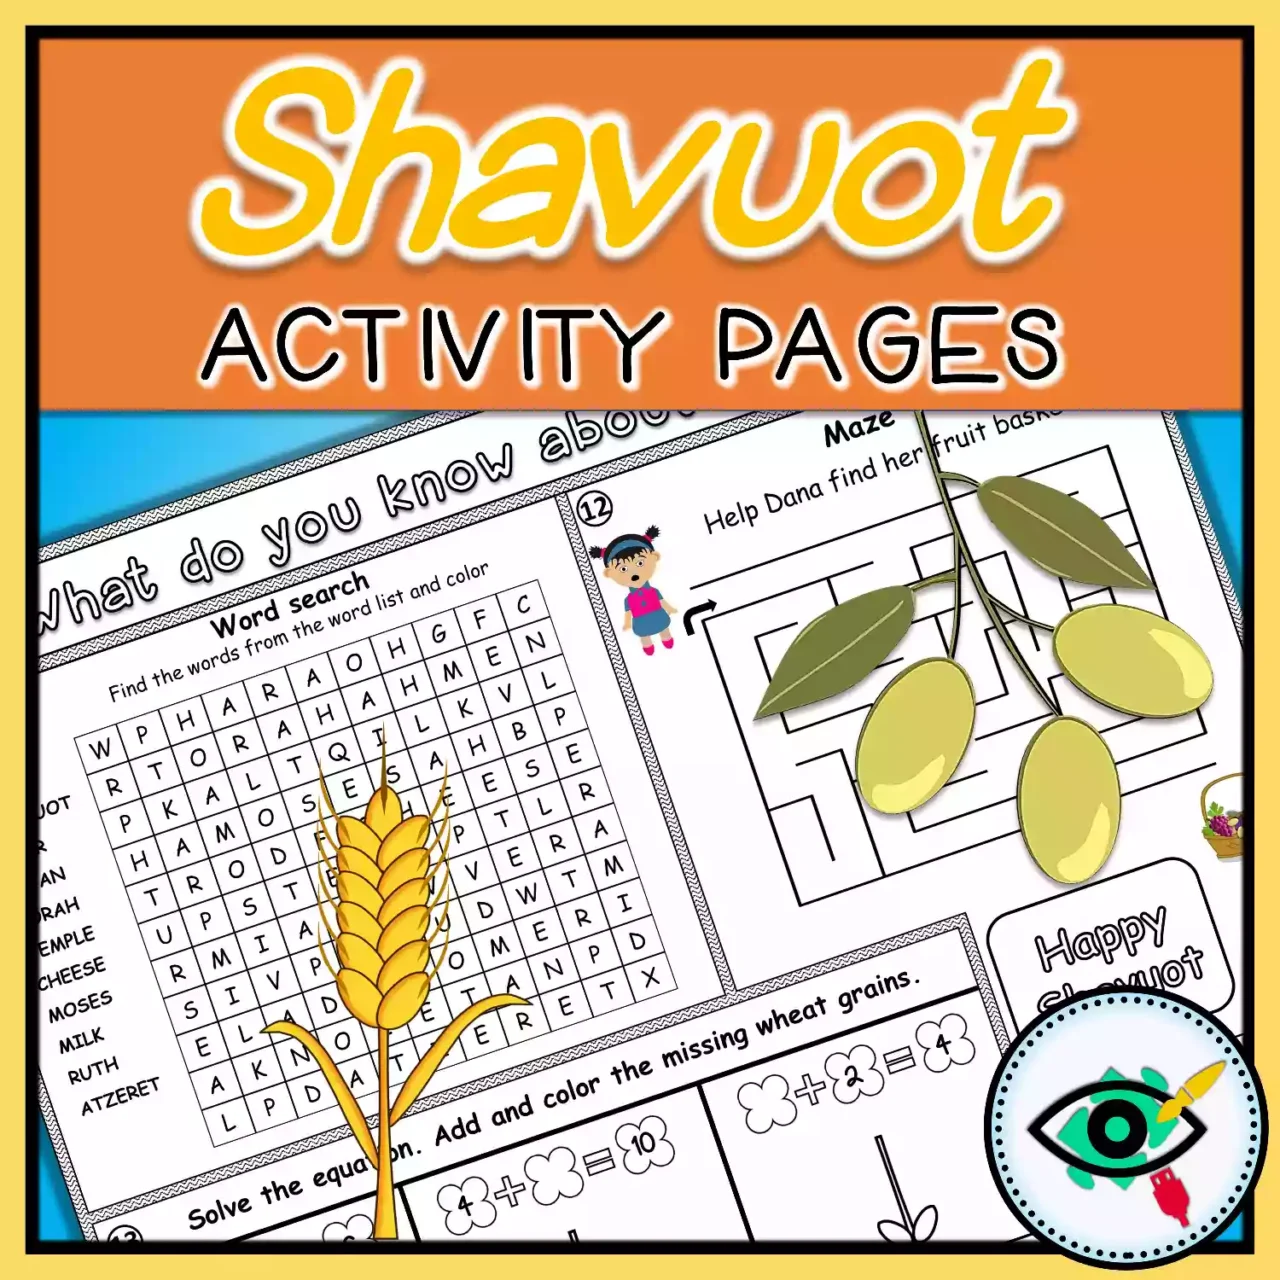 Shavuot Activity Pages for Kids - Featured 3 | Planerium